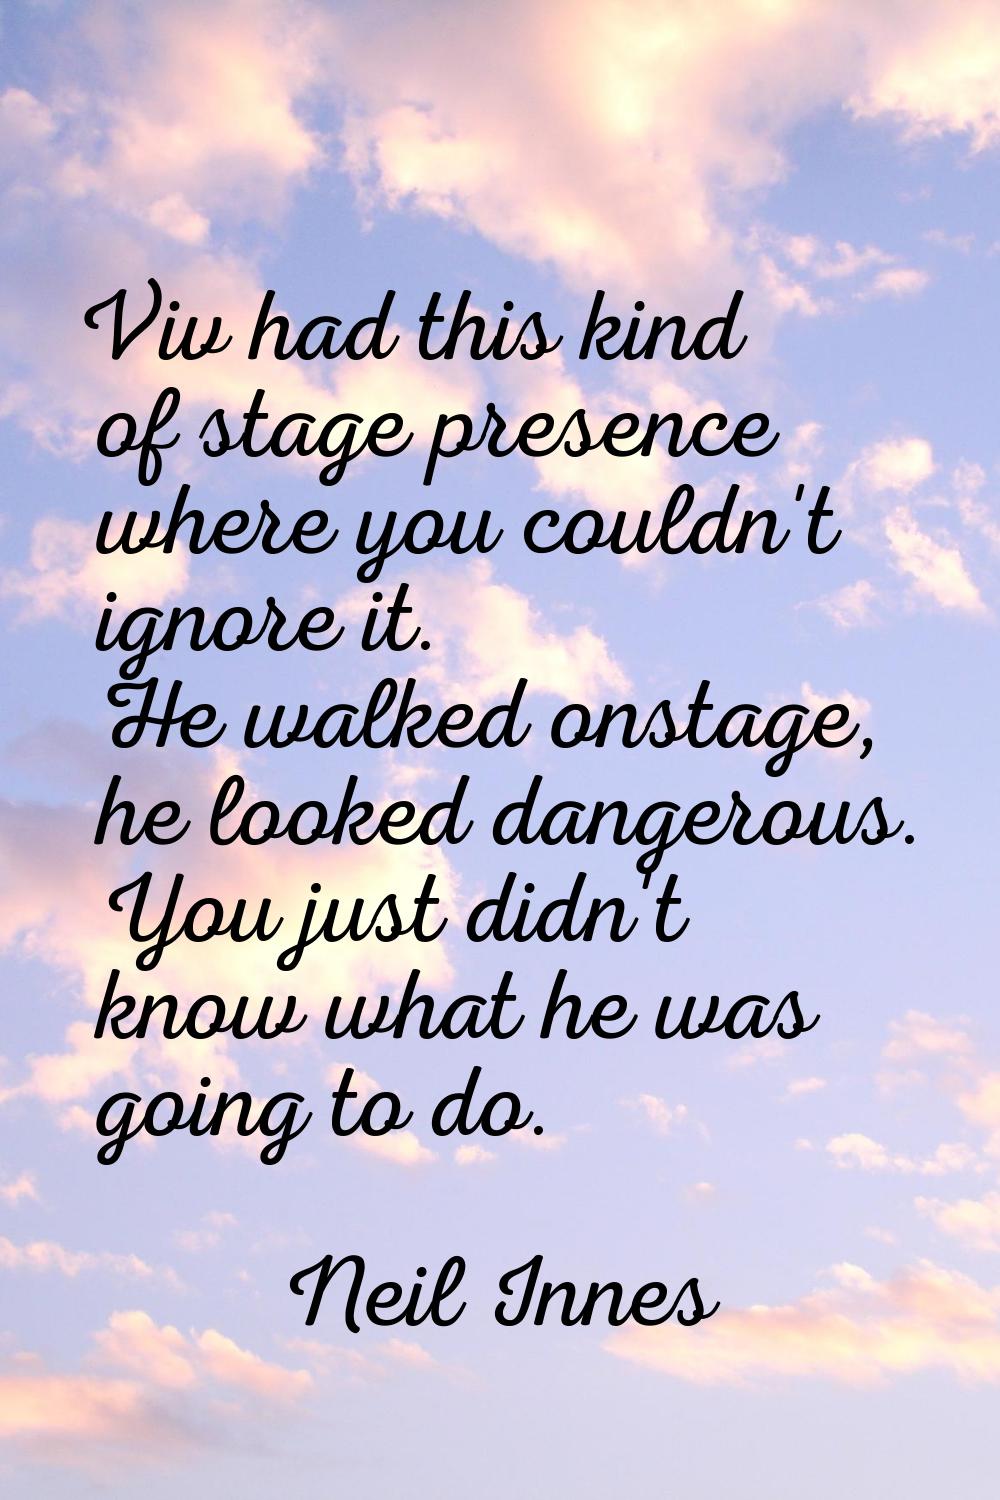 Viv had this kind of stage presence where you couldn't ignore it. He walked onstage, he looked dang